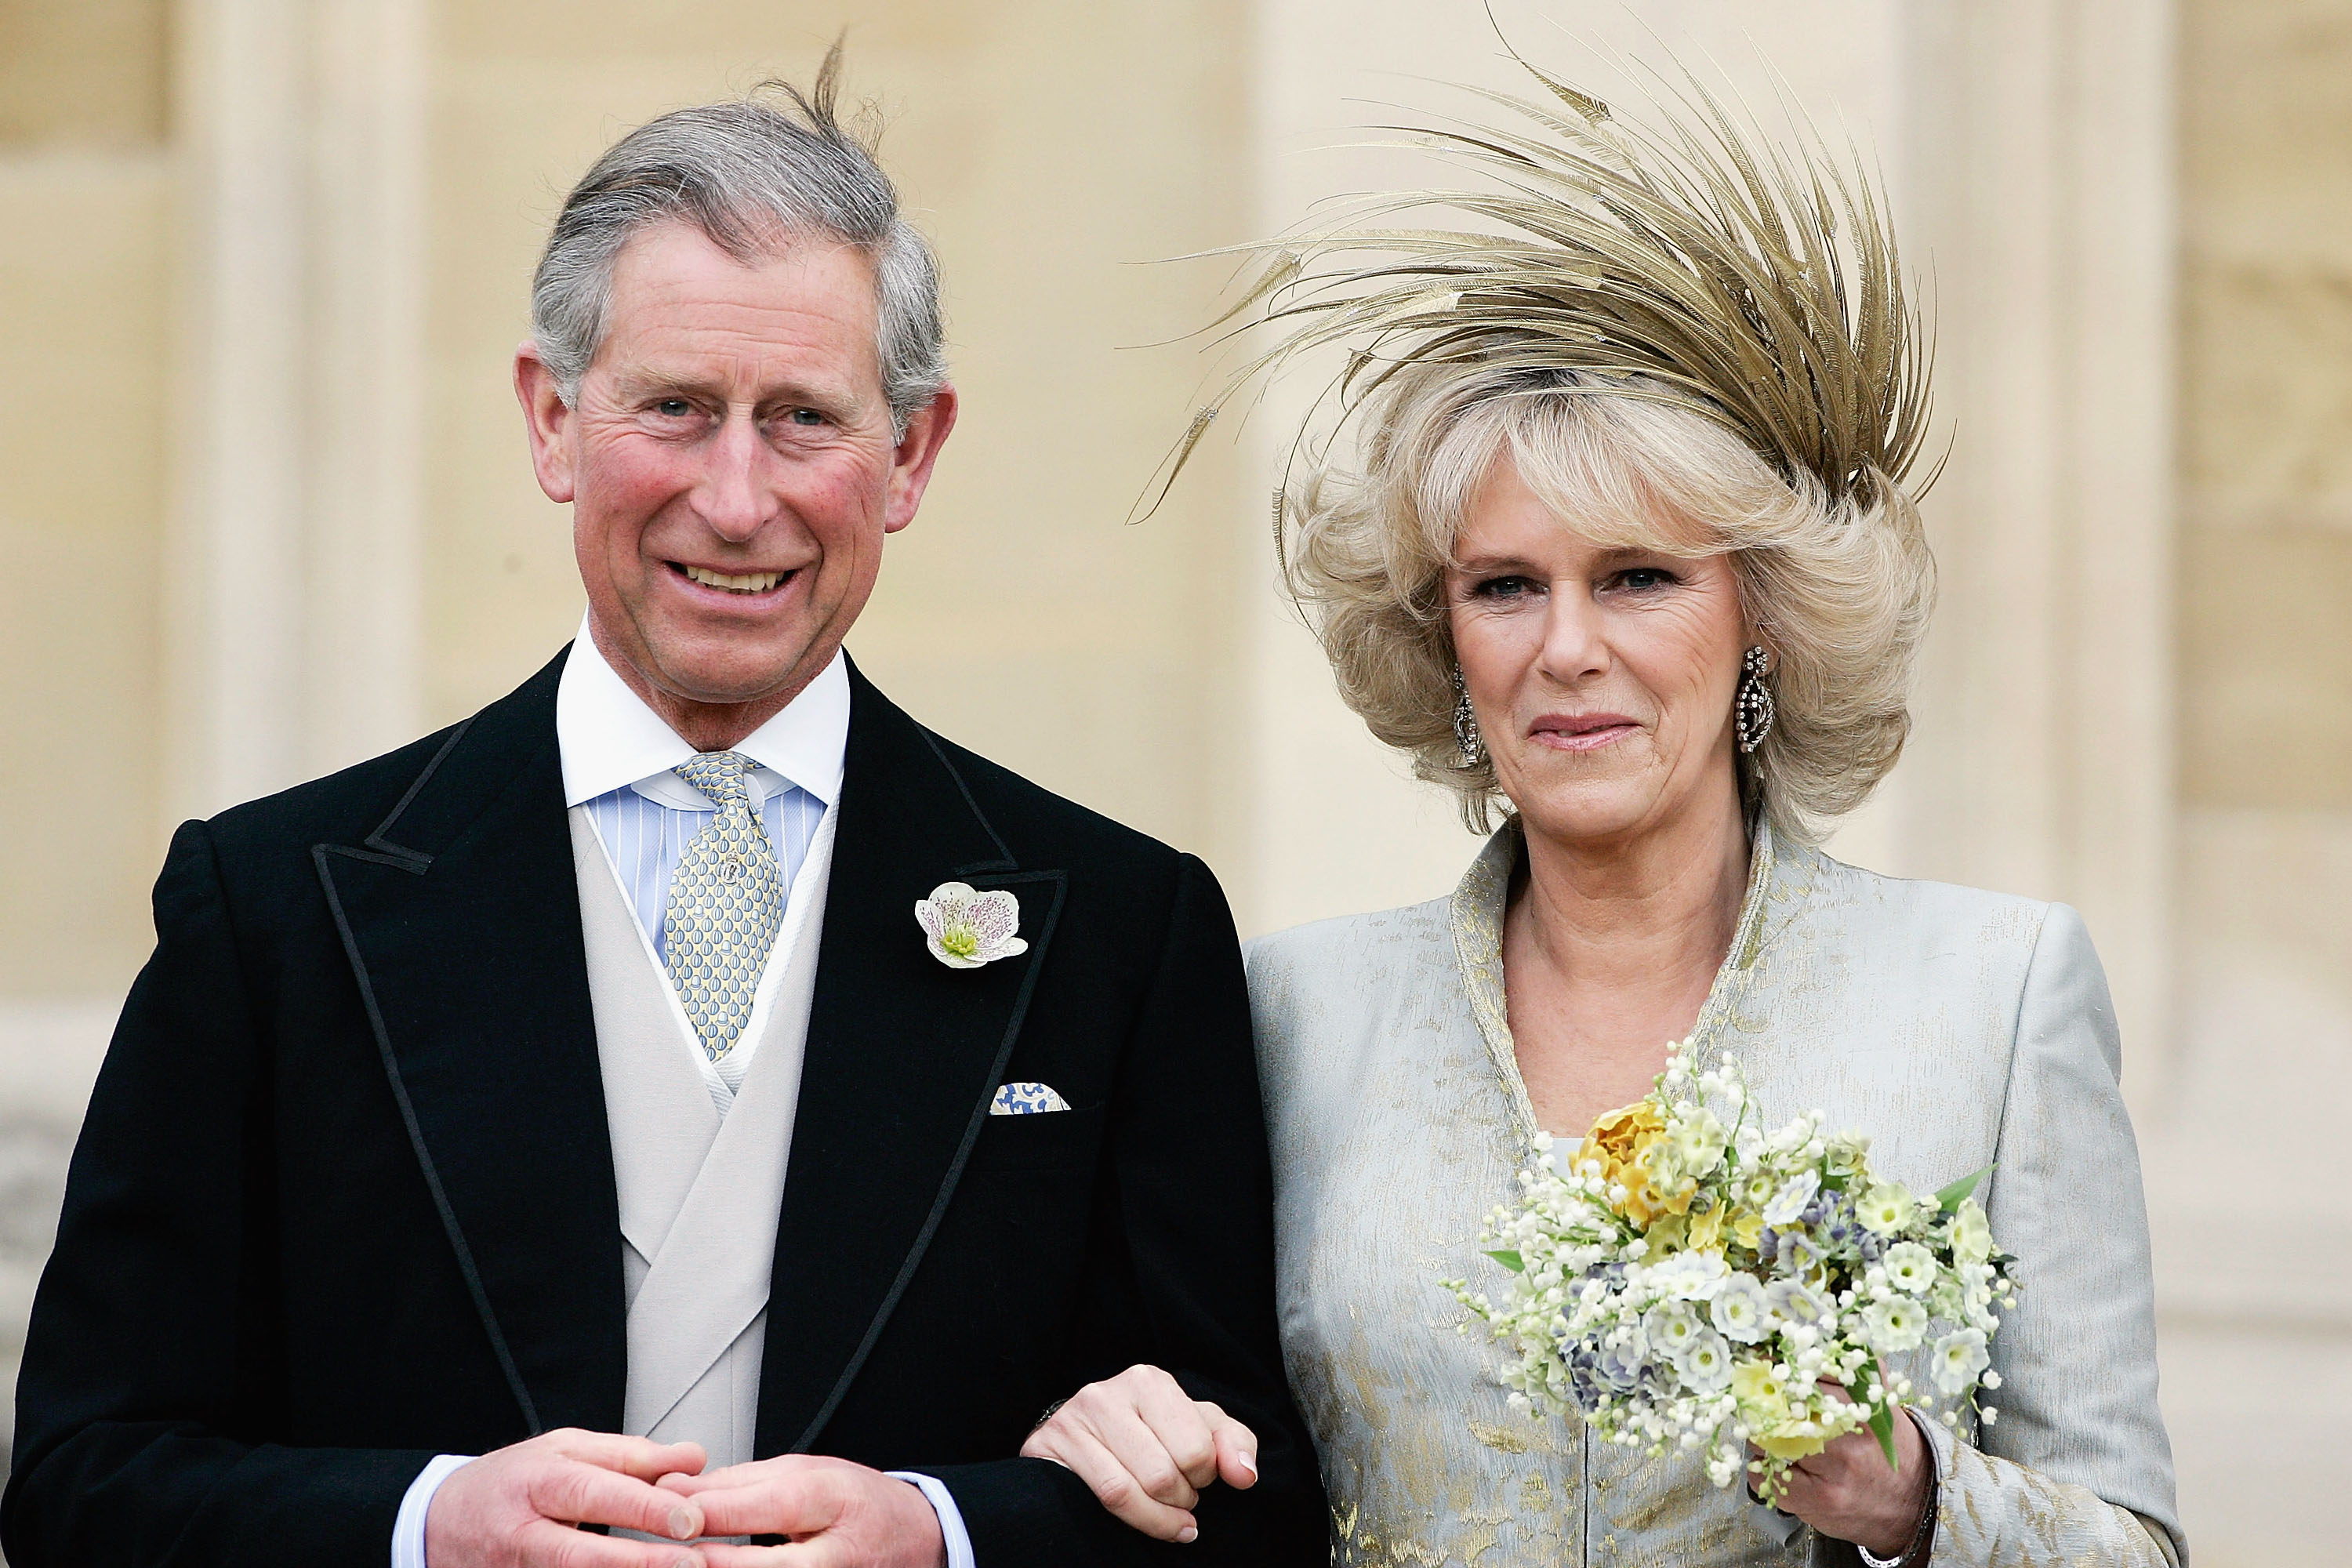 King Charles and Queen Camilla leave the prayer service blessing their marriage on April 9, 2005 in Berkshire, England | Source: Getty Images